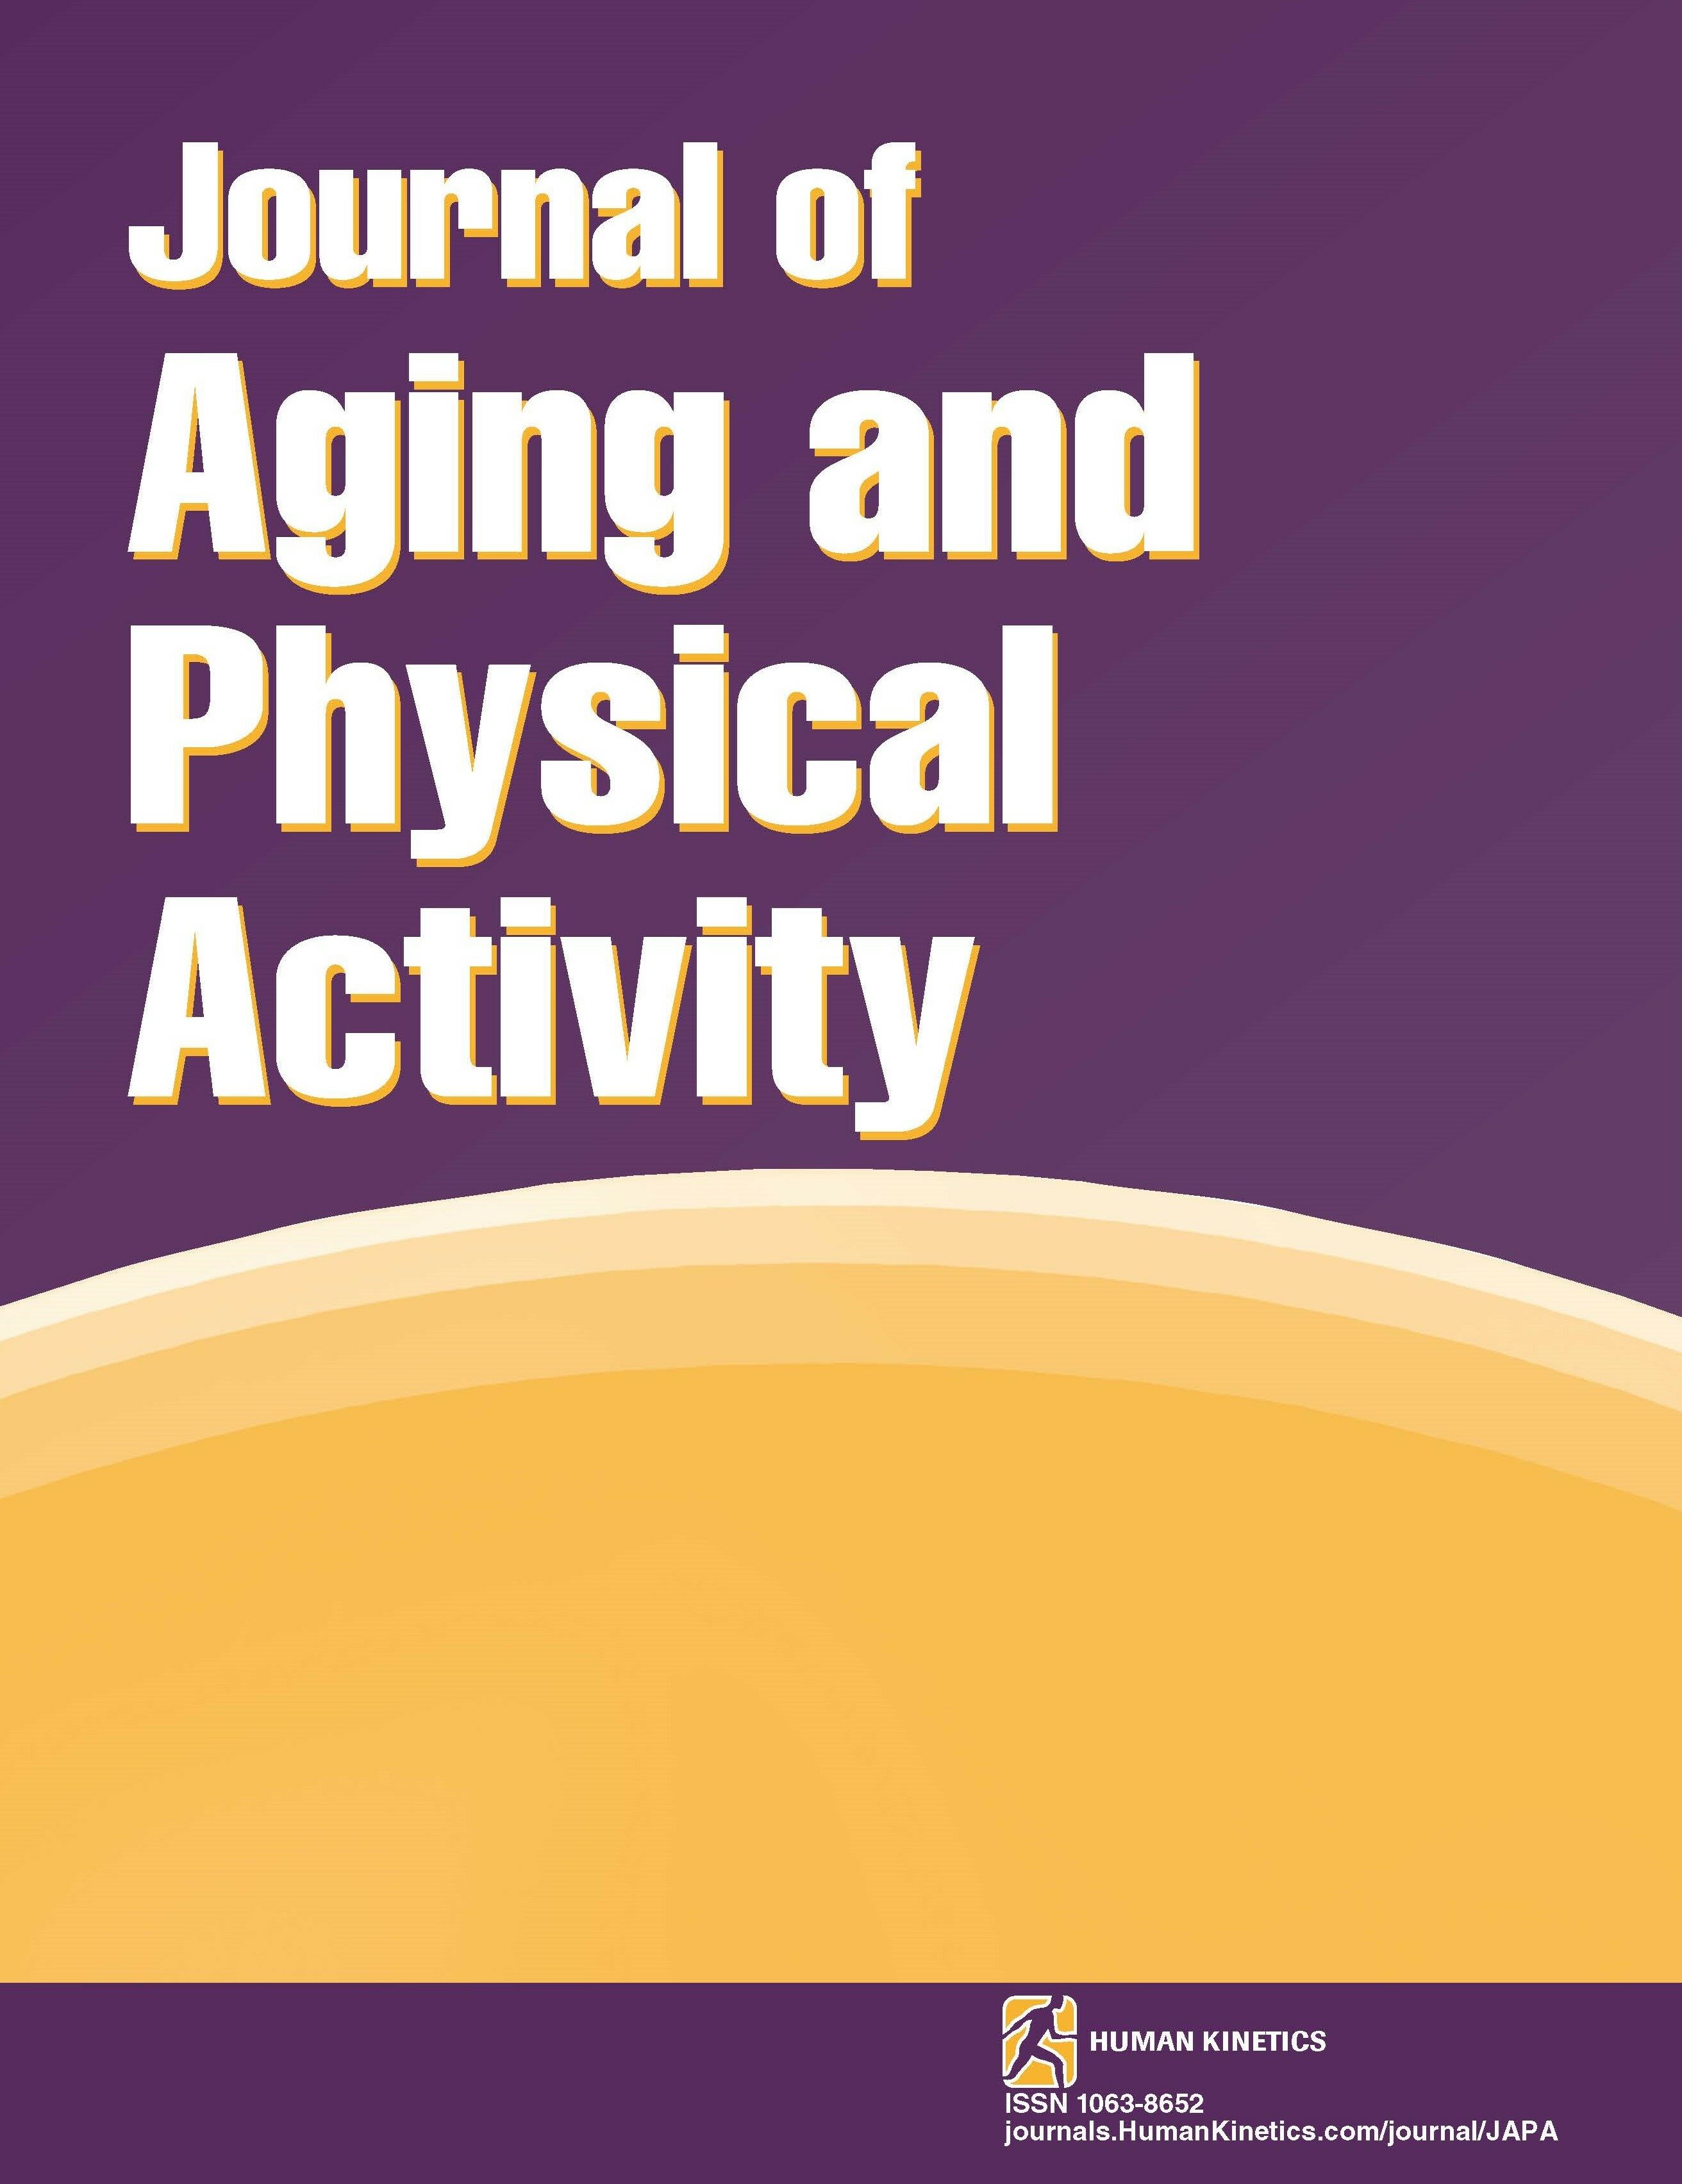 Joy, Jobs, and Sweat: Older Adults’ Physical Activity During COVID-19 Lockdowns in New Zealand